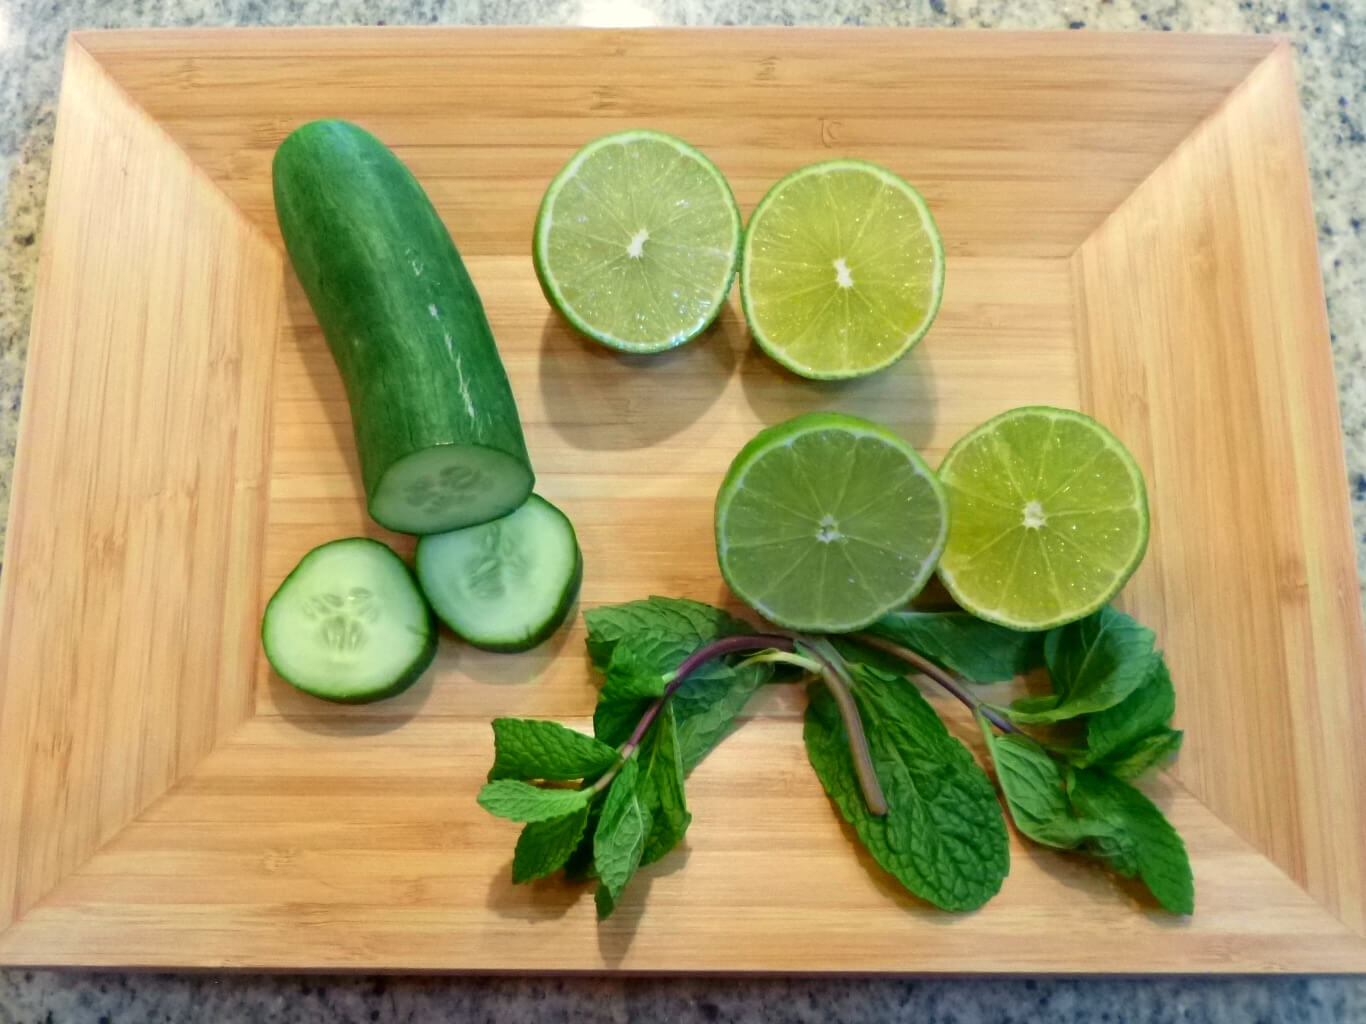 citrus mint drink imgredients - A Cool Drink for Hot Days - Recipe Included!